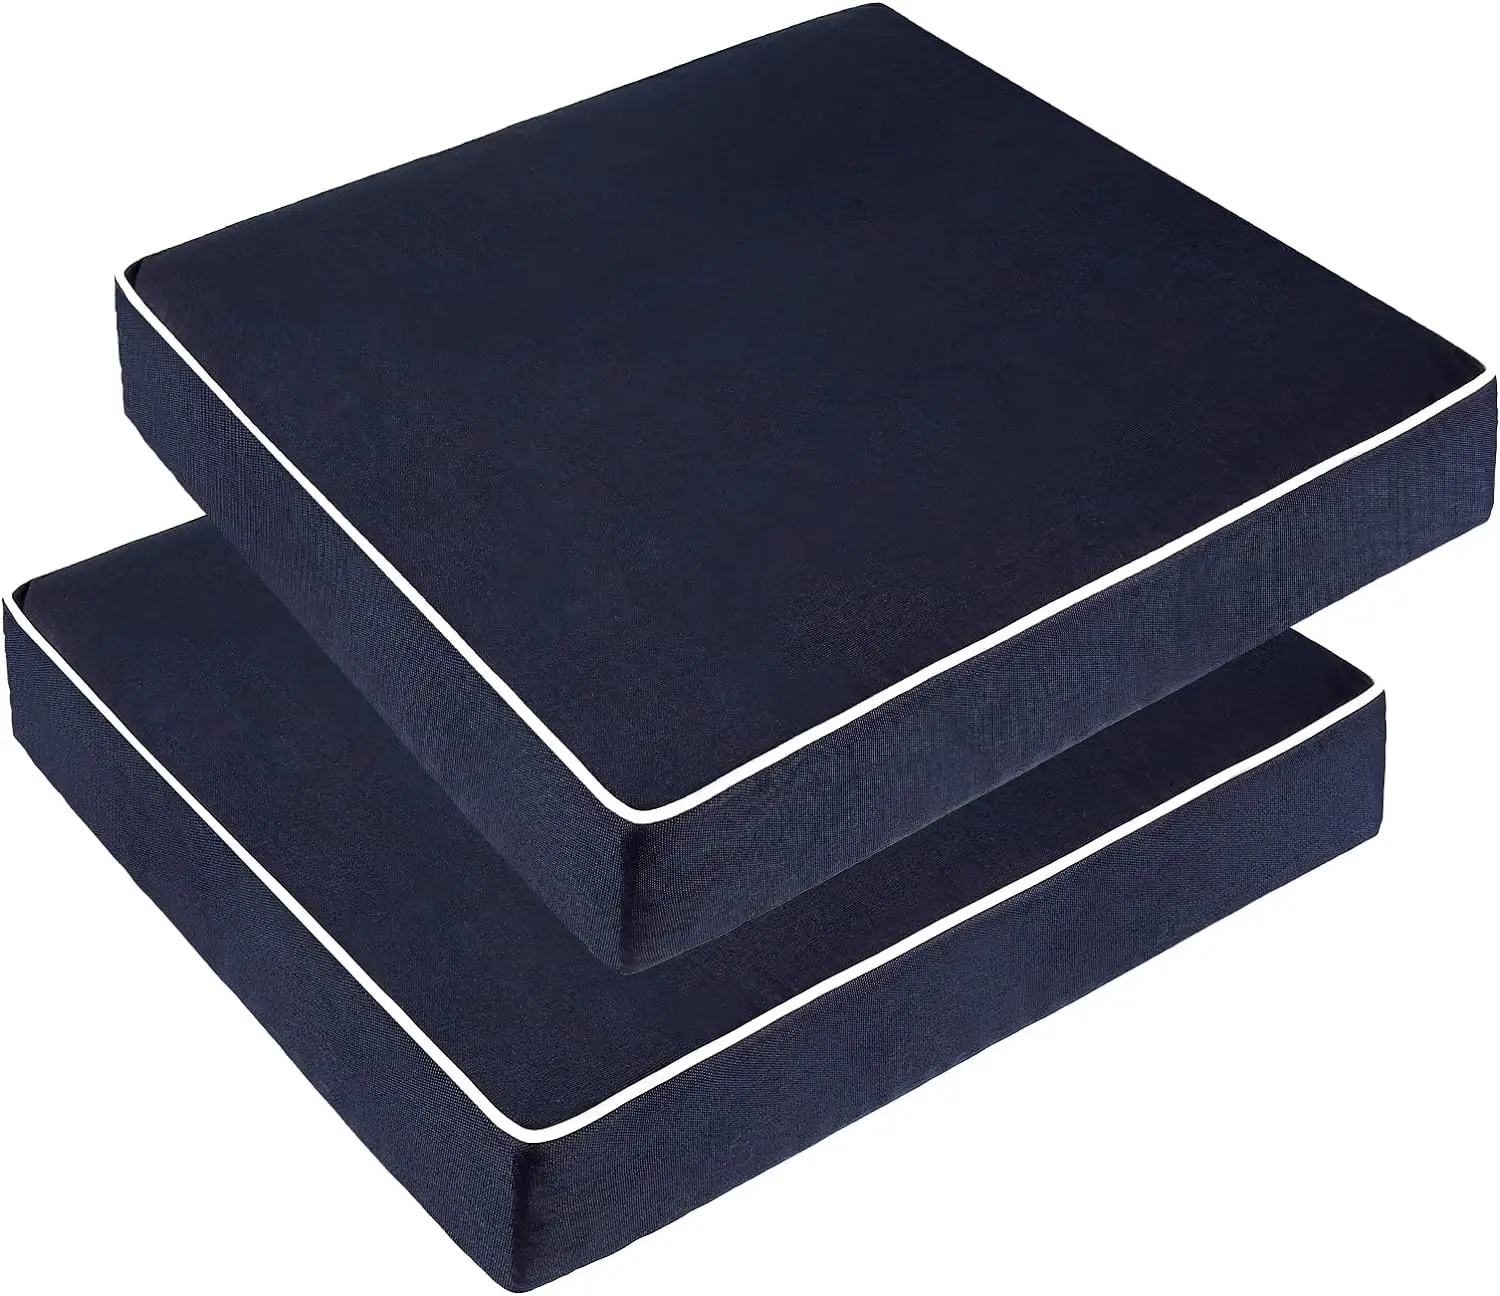 

Pack Outdoor Chair Cushion 20" X 20" X 4", Waterproof Outdoor Seat Cushions with Non-Skid Ties, Navy Blue02 (Cushion Lazy susan